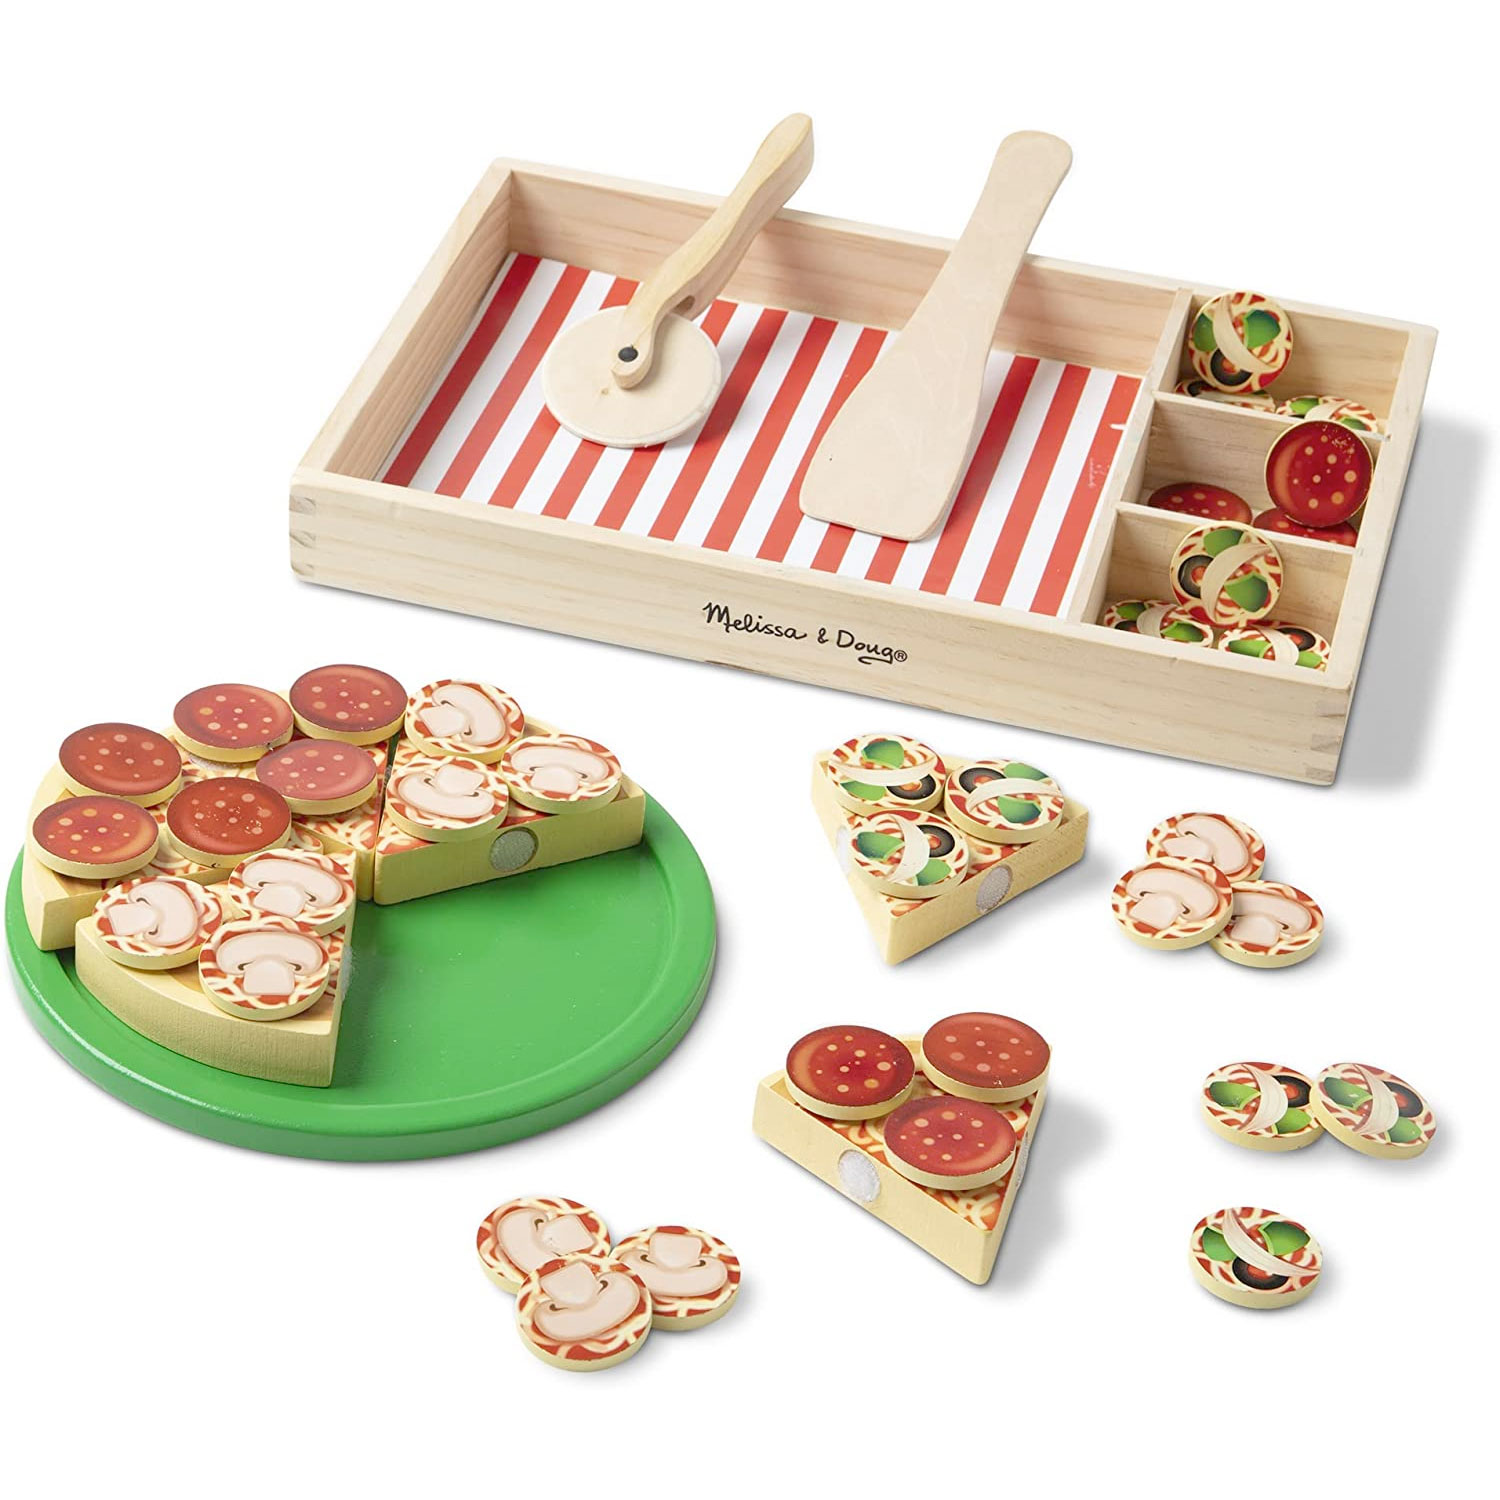 Amazon：Melissa & Doug Wooden Pizza Play Food Set With 36 Toppings只卖$22.39